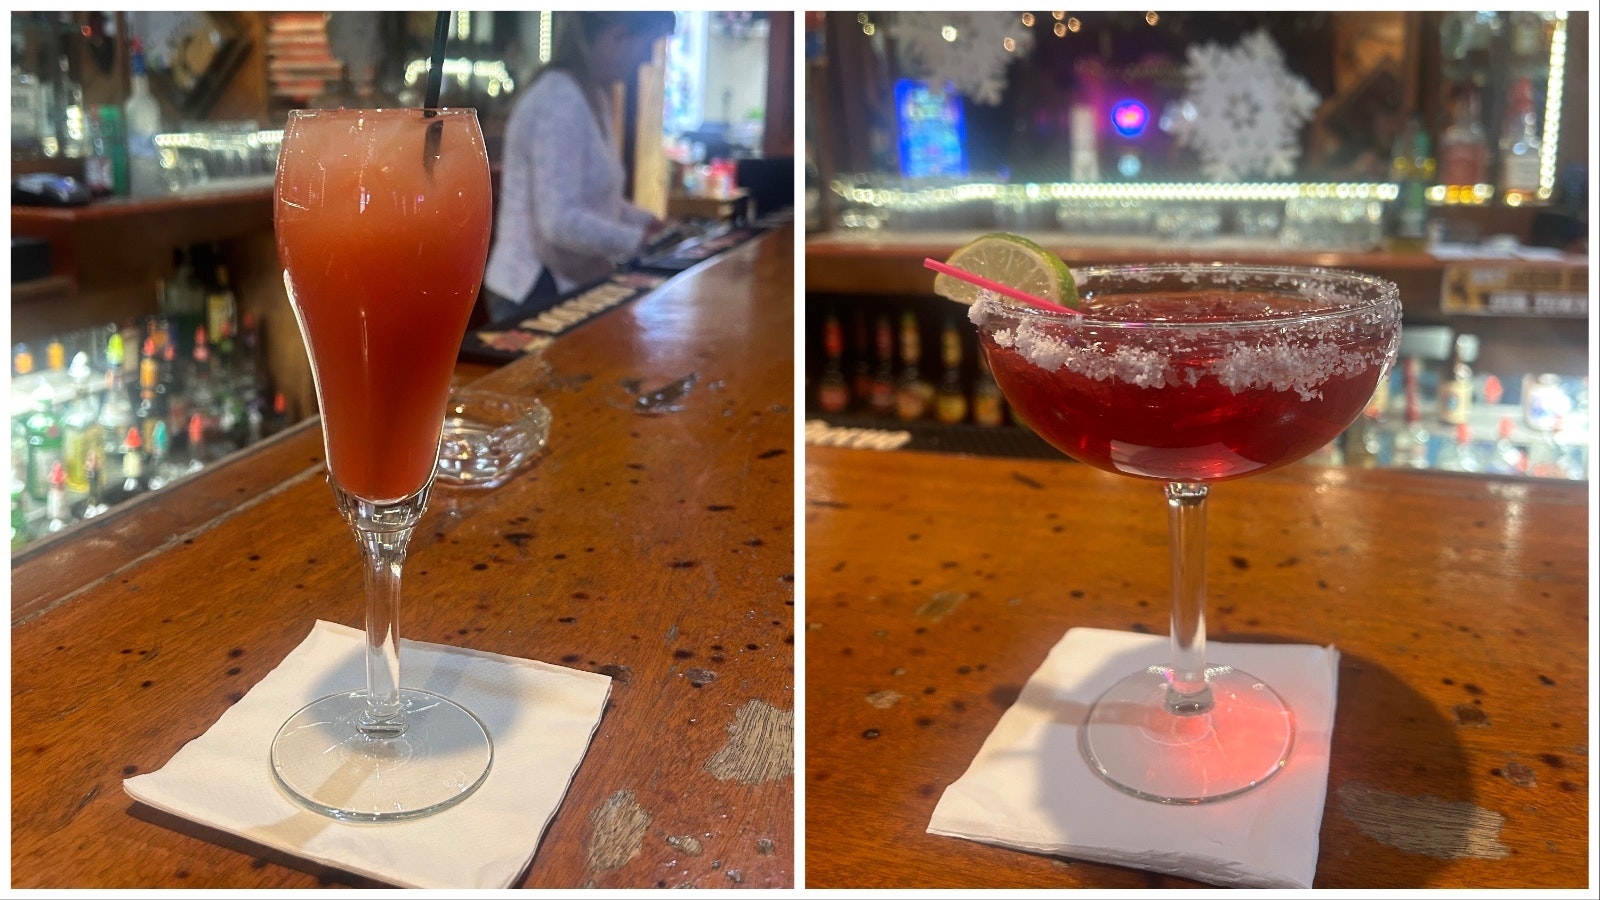 Left: The Rudolph Tipsy Punch is one of the trendy cocktails being served in bars and restaurants this winter. In the background is Lila Golden, owner of Pinedale’s Cowboy Bar. Right: The Mistletoe Margarita is another trendy cocktail being mixed at bars and restaurants this winter.